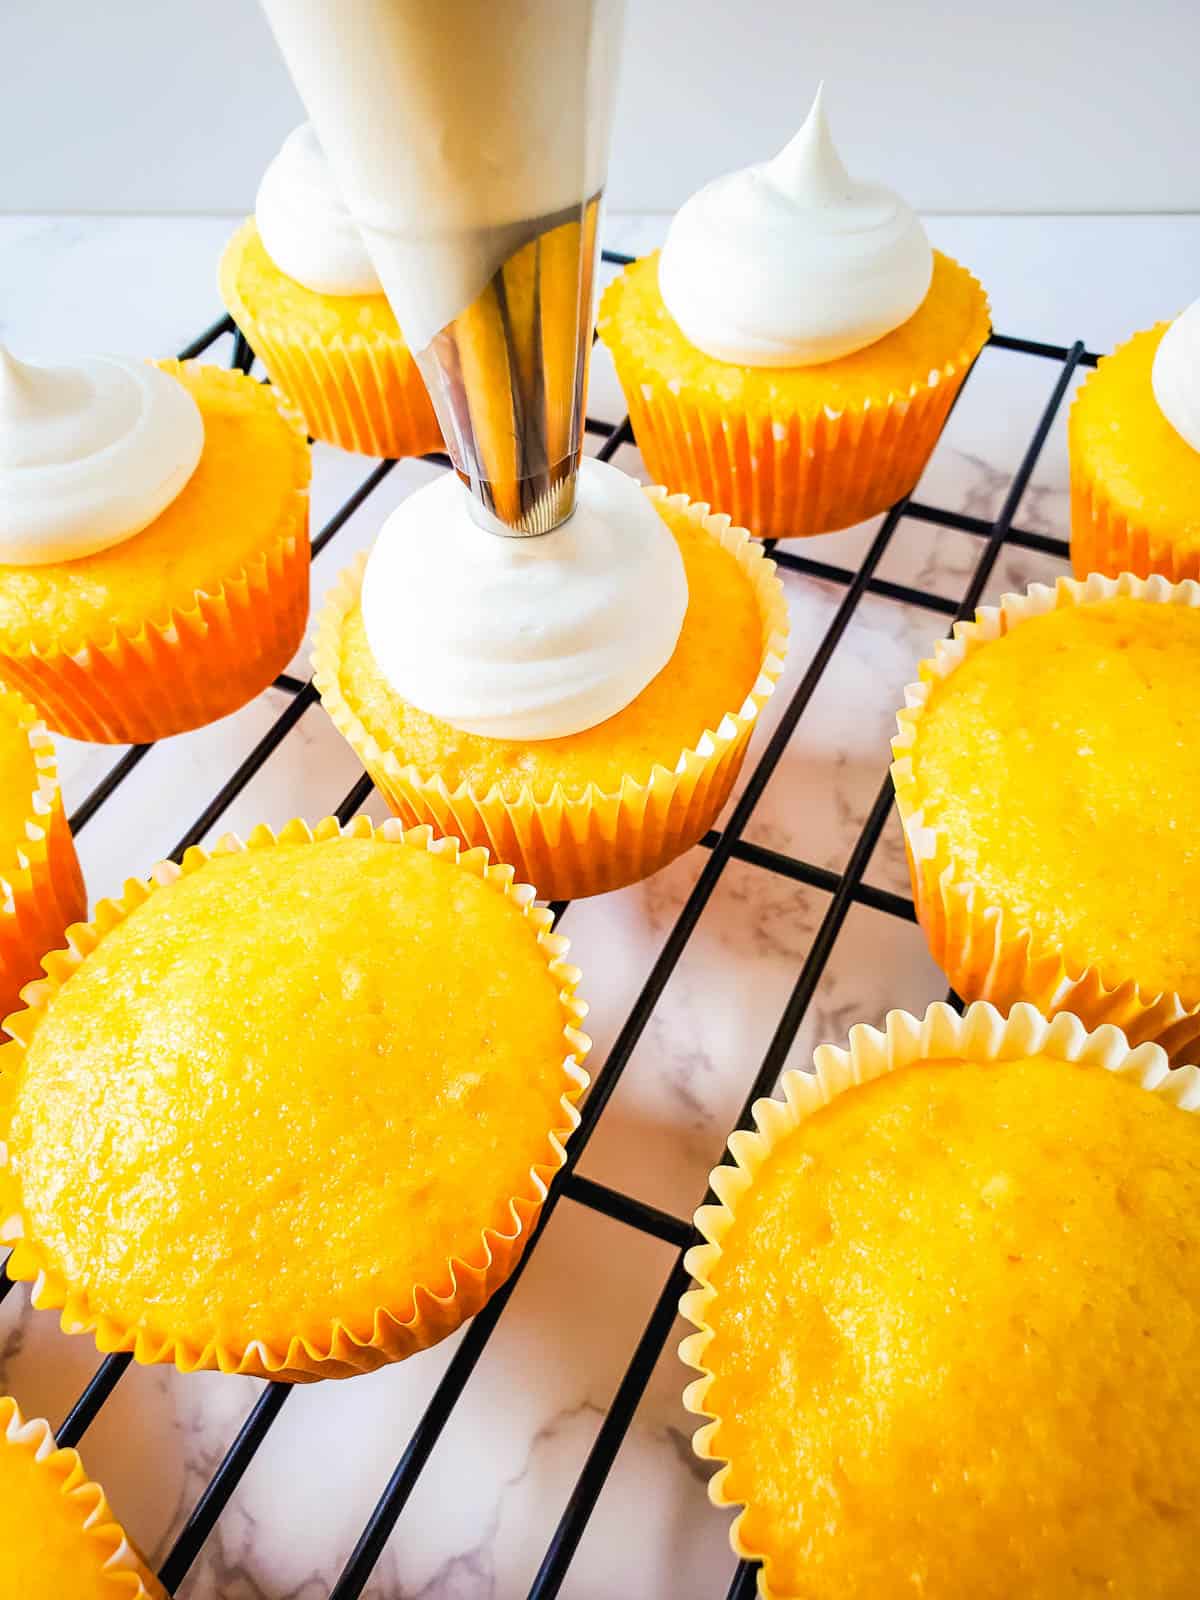 Piping rum infused frosting on pina colada cupcakes.